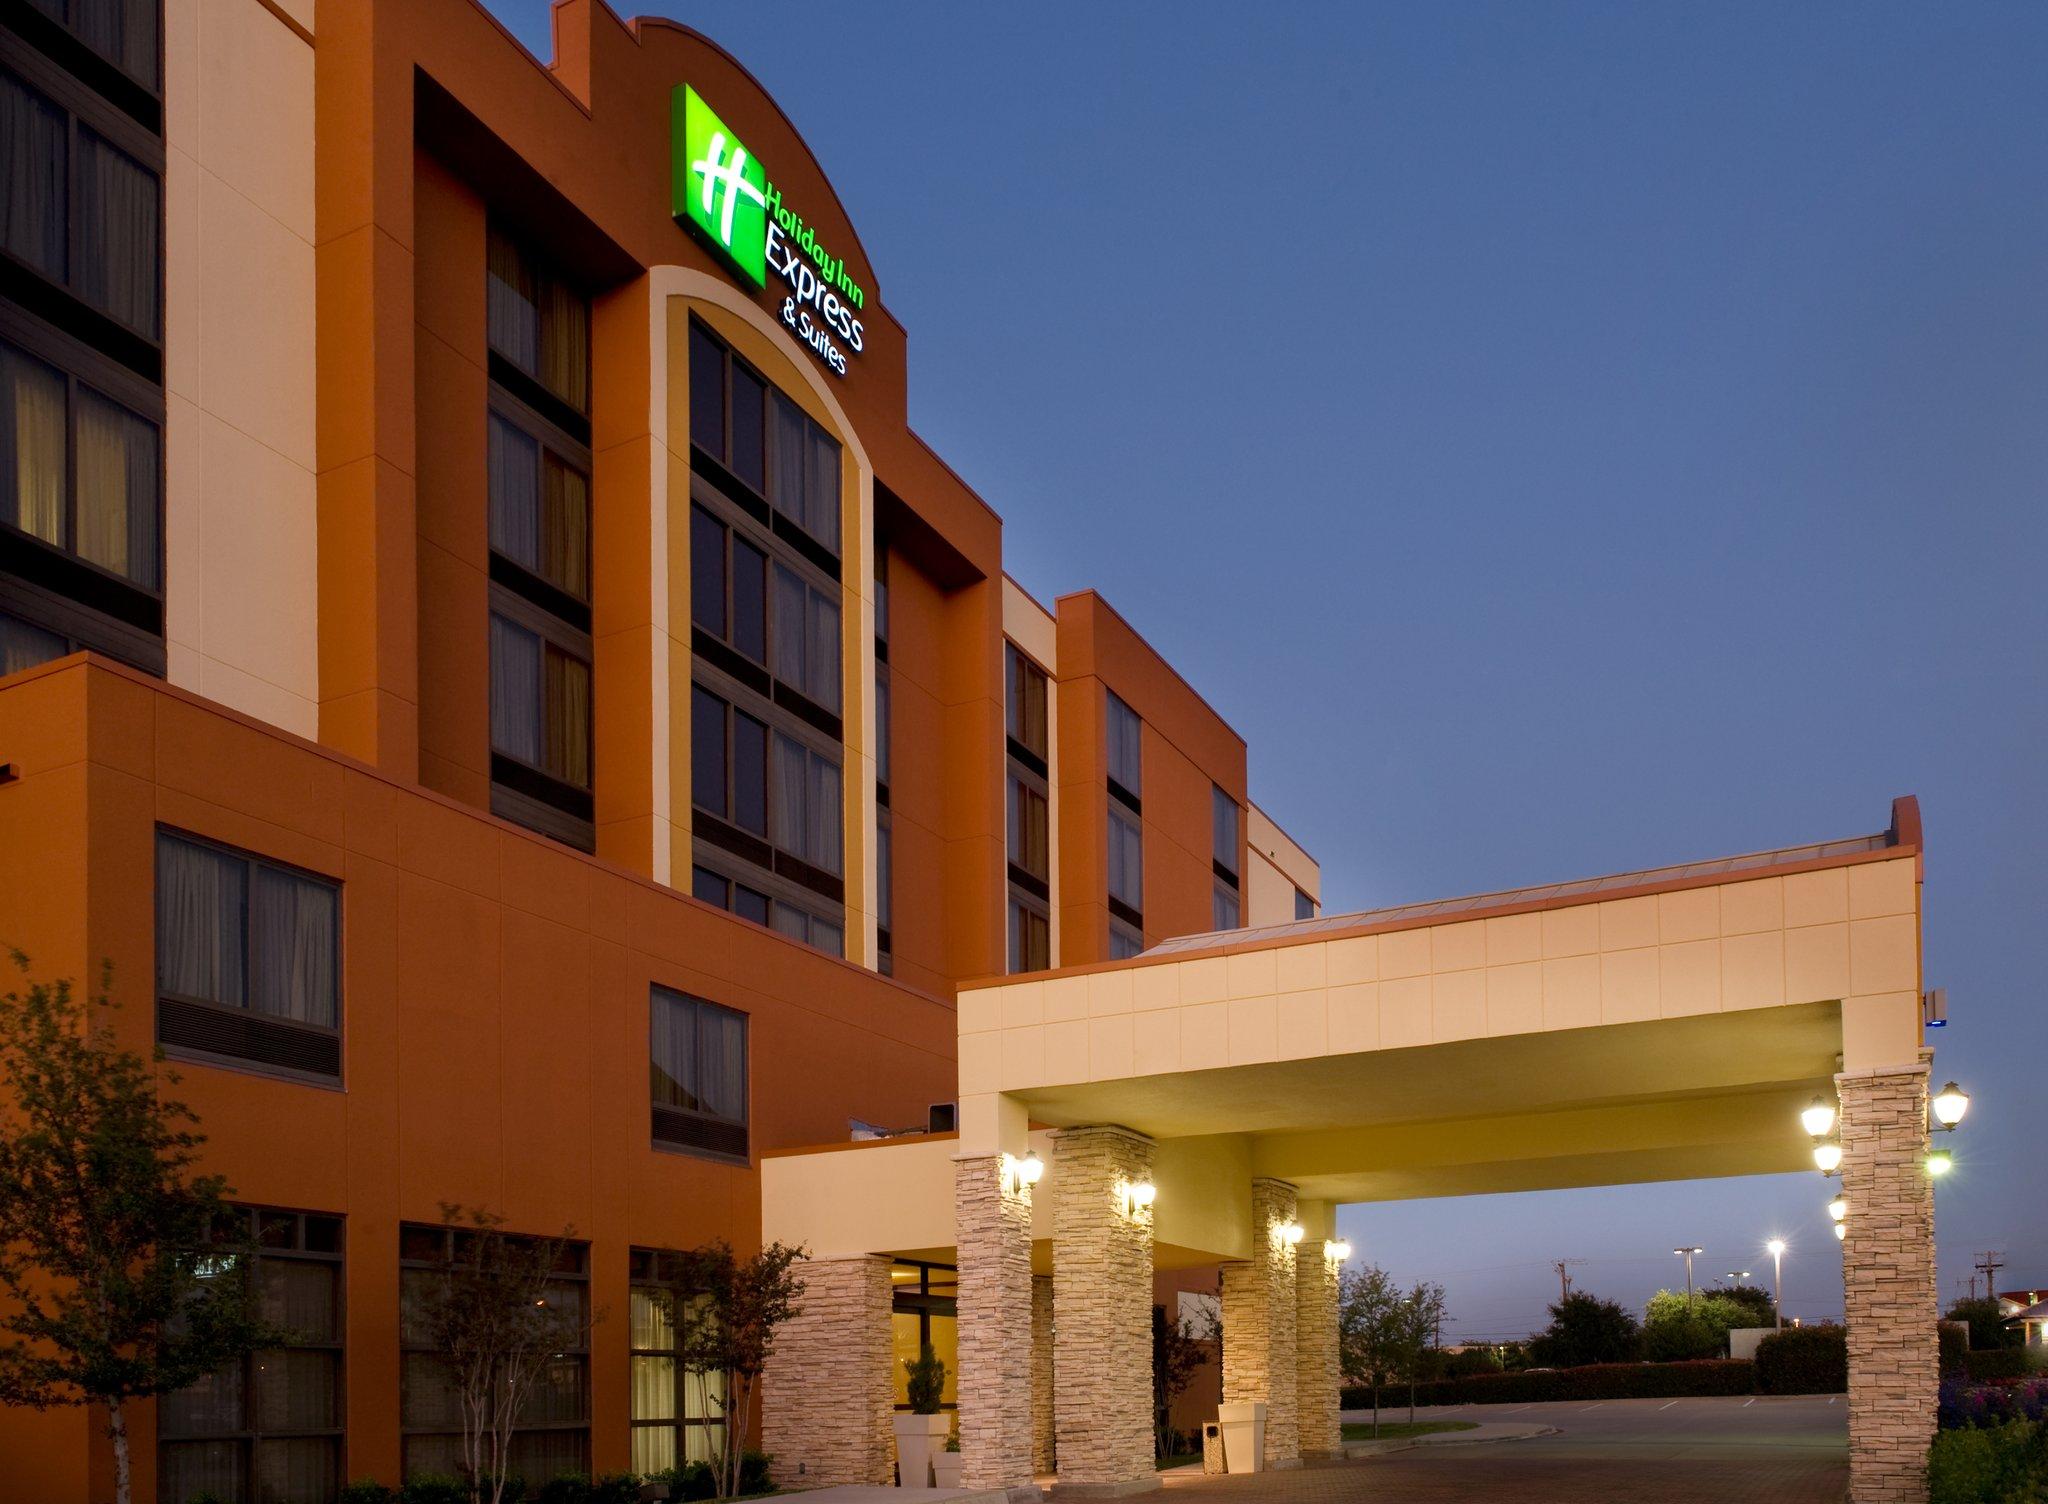 Holiday Inn Express Hotel & Suites Dallas Ft. Worth Airport South in Irving, TX